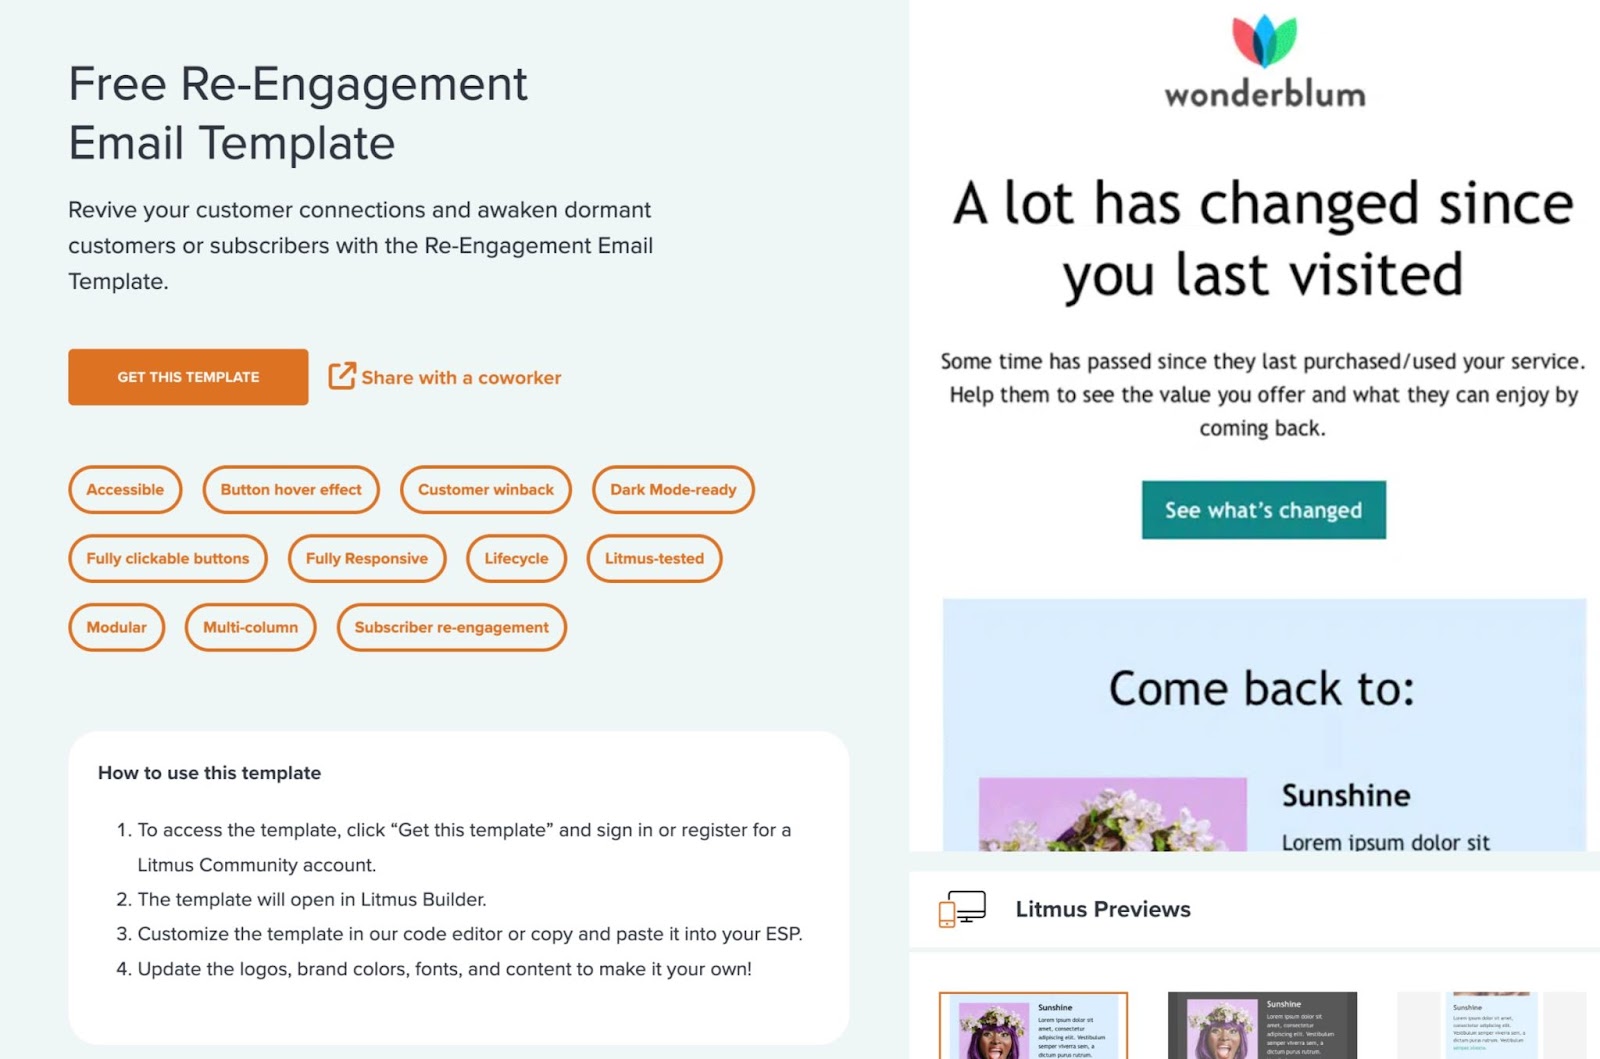 "Free Re-Engagement Email Template" page